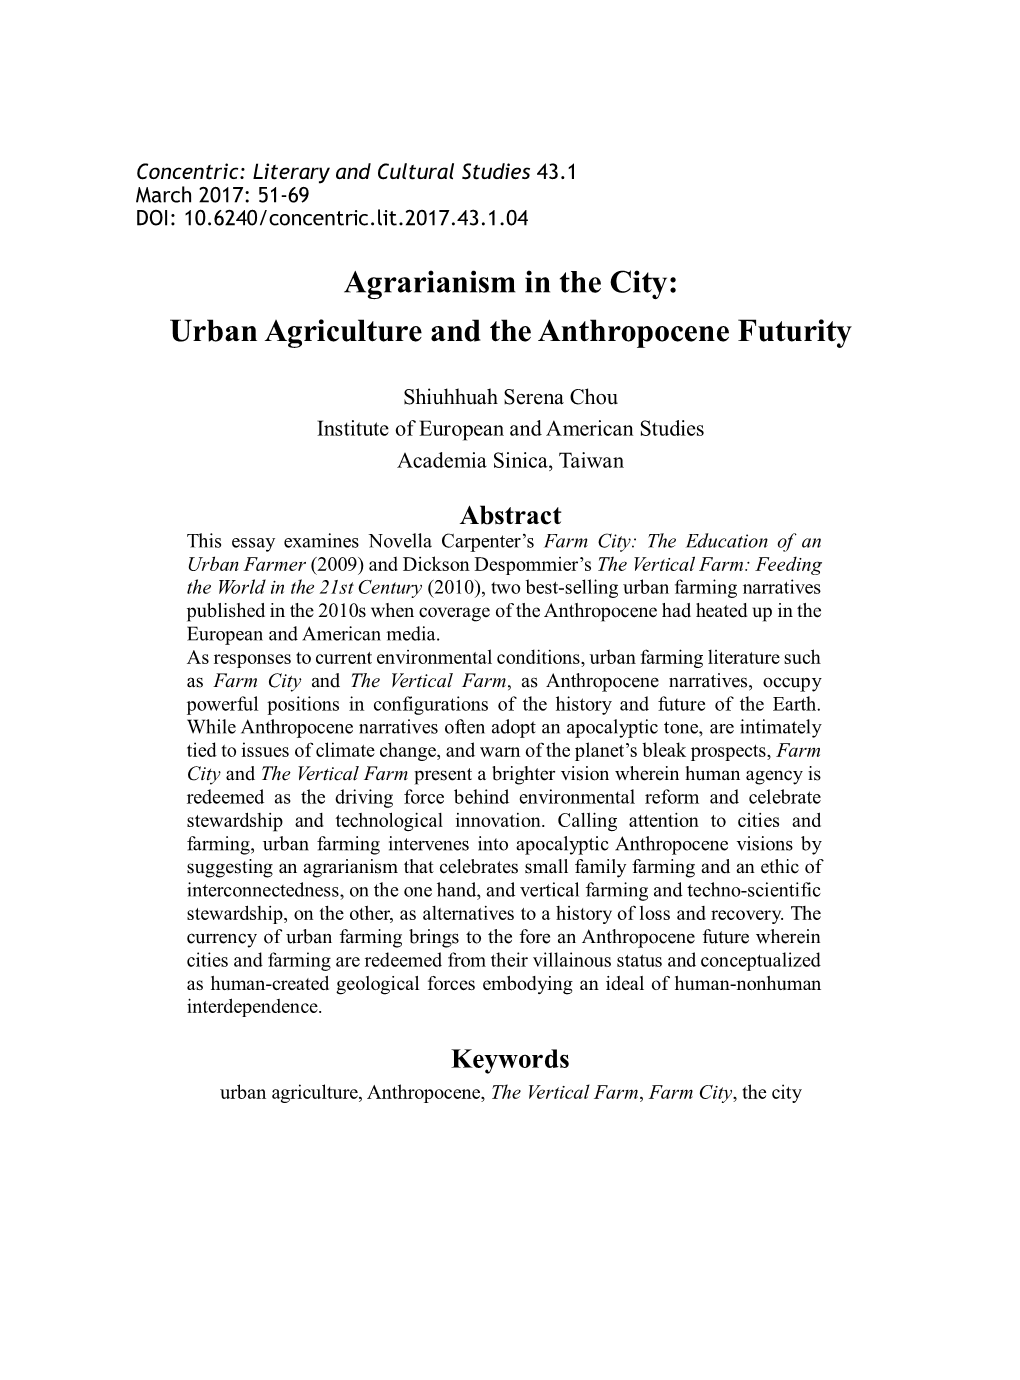 Agrarianism in the City: Urban Agriculture and the Anthropocene Futurity